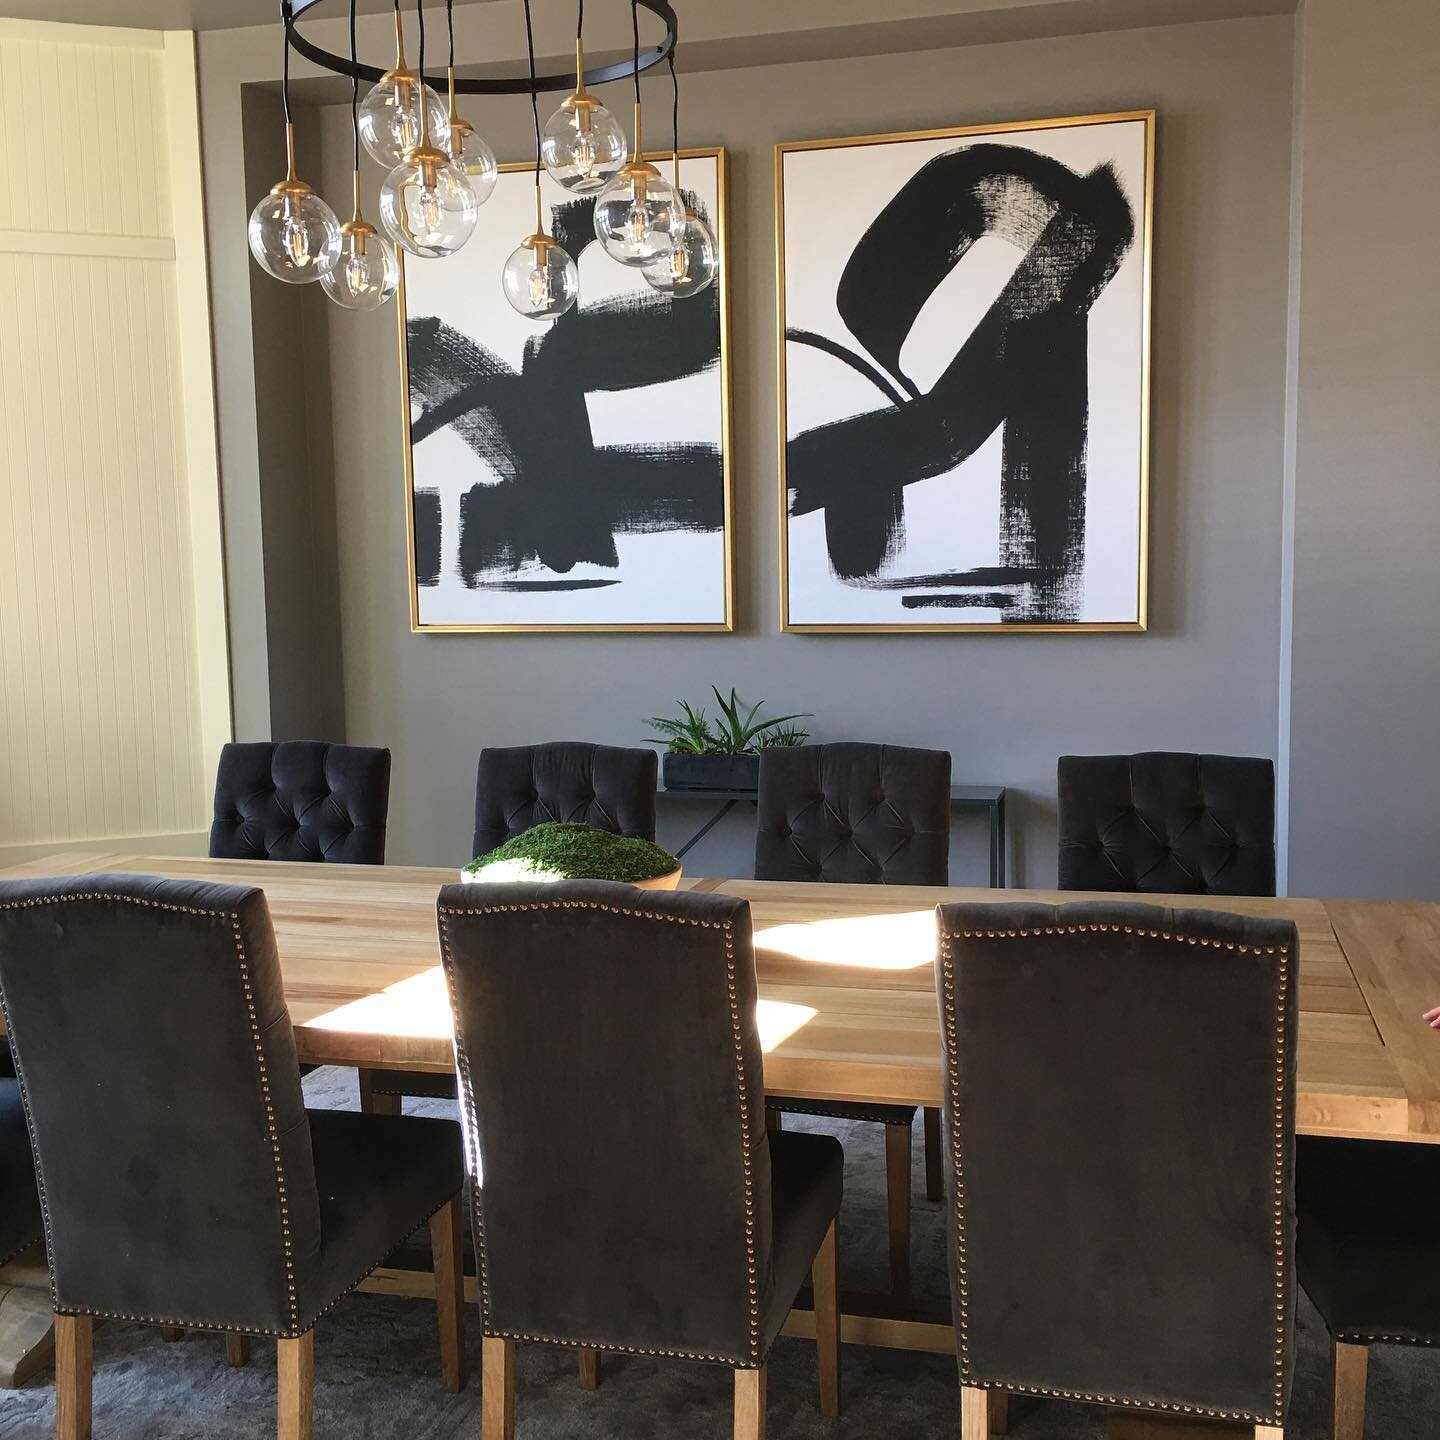 Classic. Timeless. Modern. It&rsquo;s nice to have a dining room that can fit 10 people. More family and friend gatherings. More space for all that delicious food. 
#héroninspired #interiordesign #diningroom #gatheringspaces #eating #formal